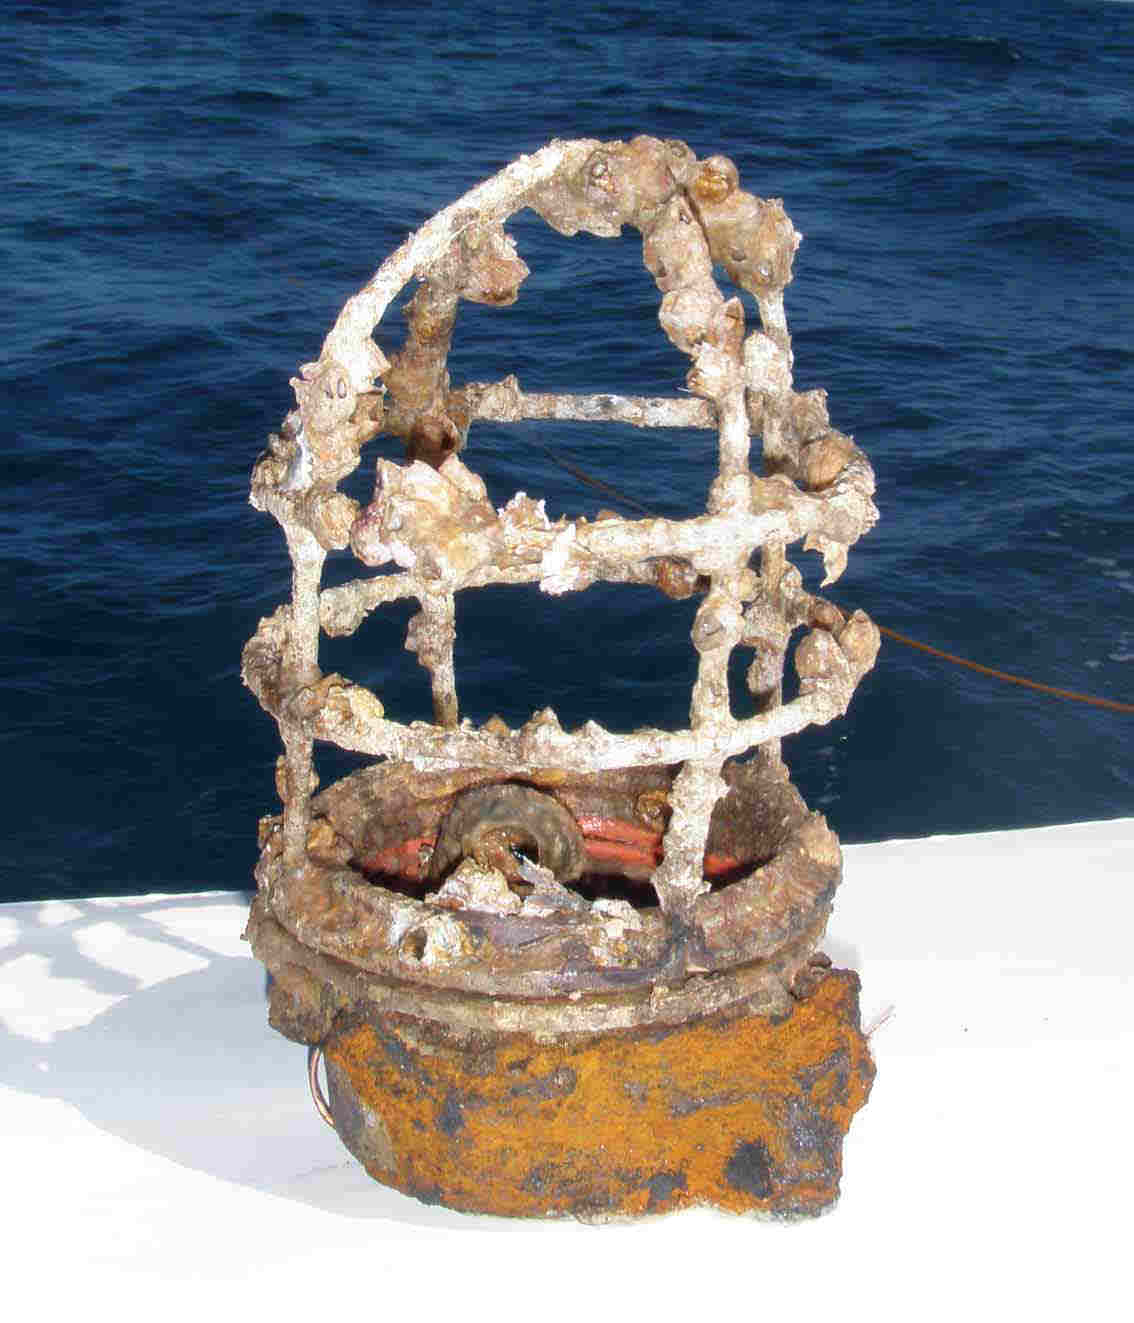 Cage Light recovered from the Tamalipus